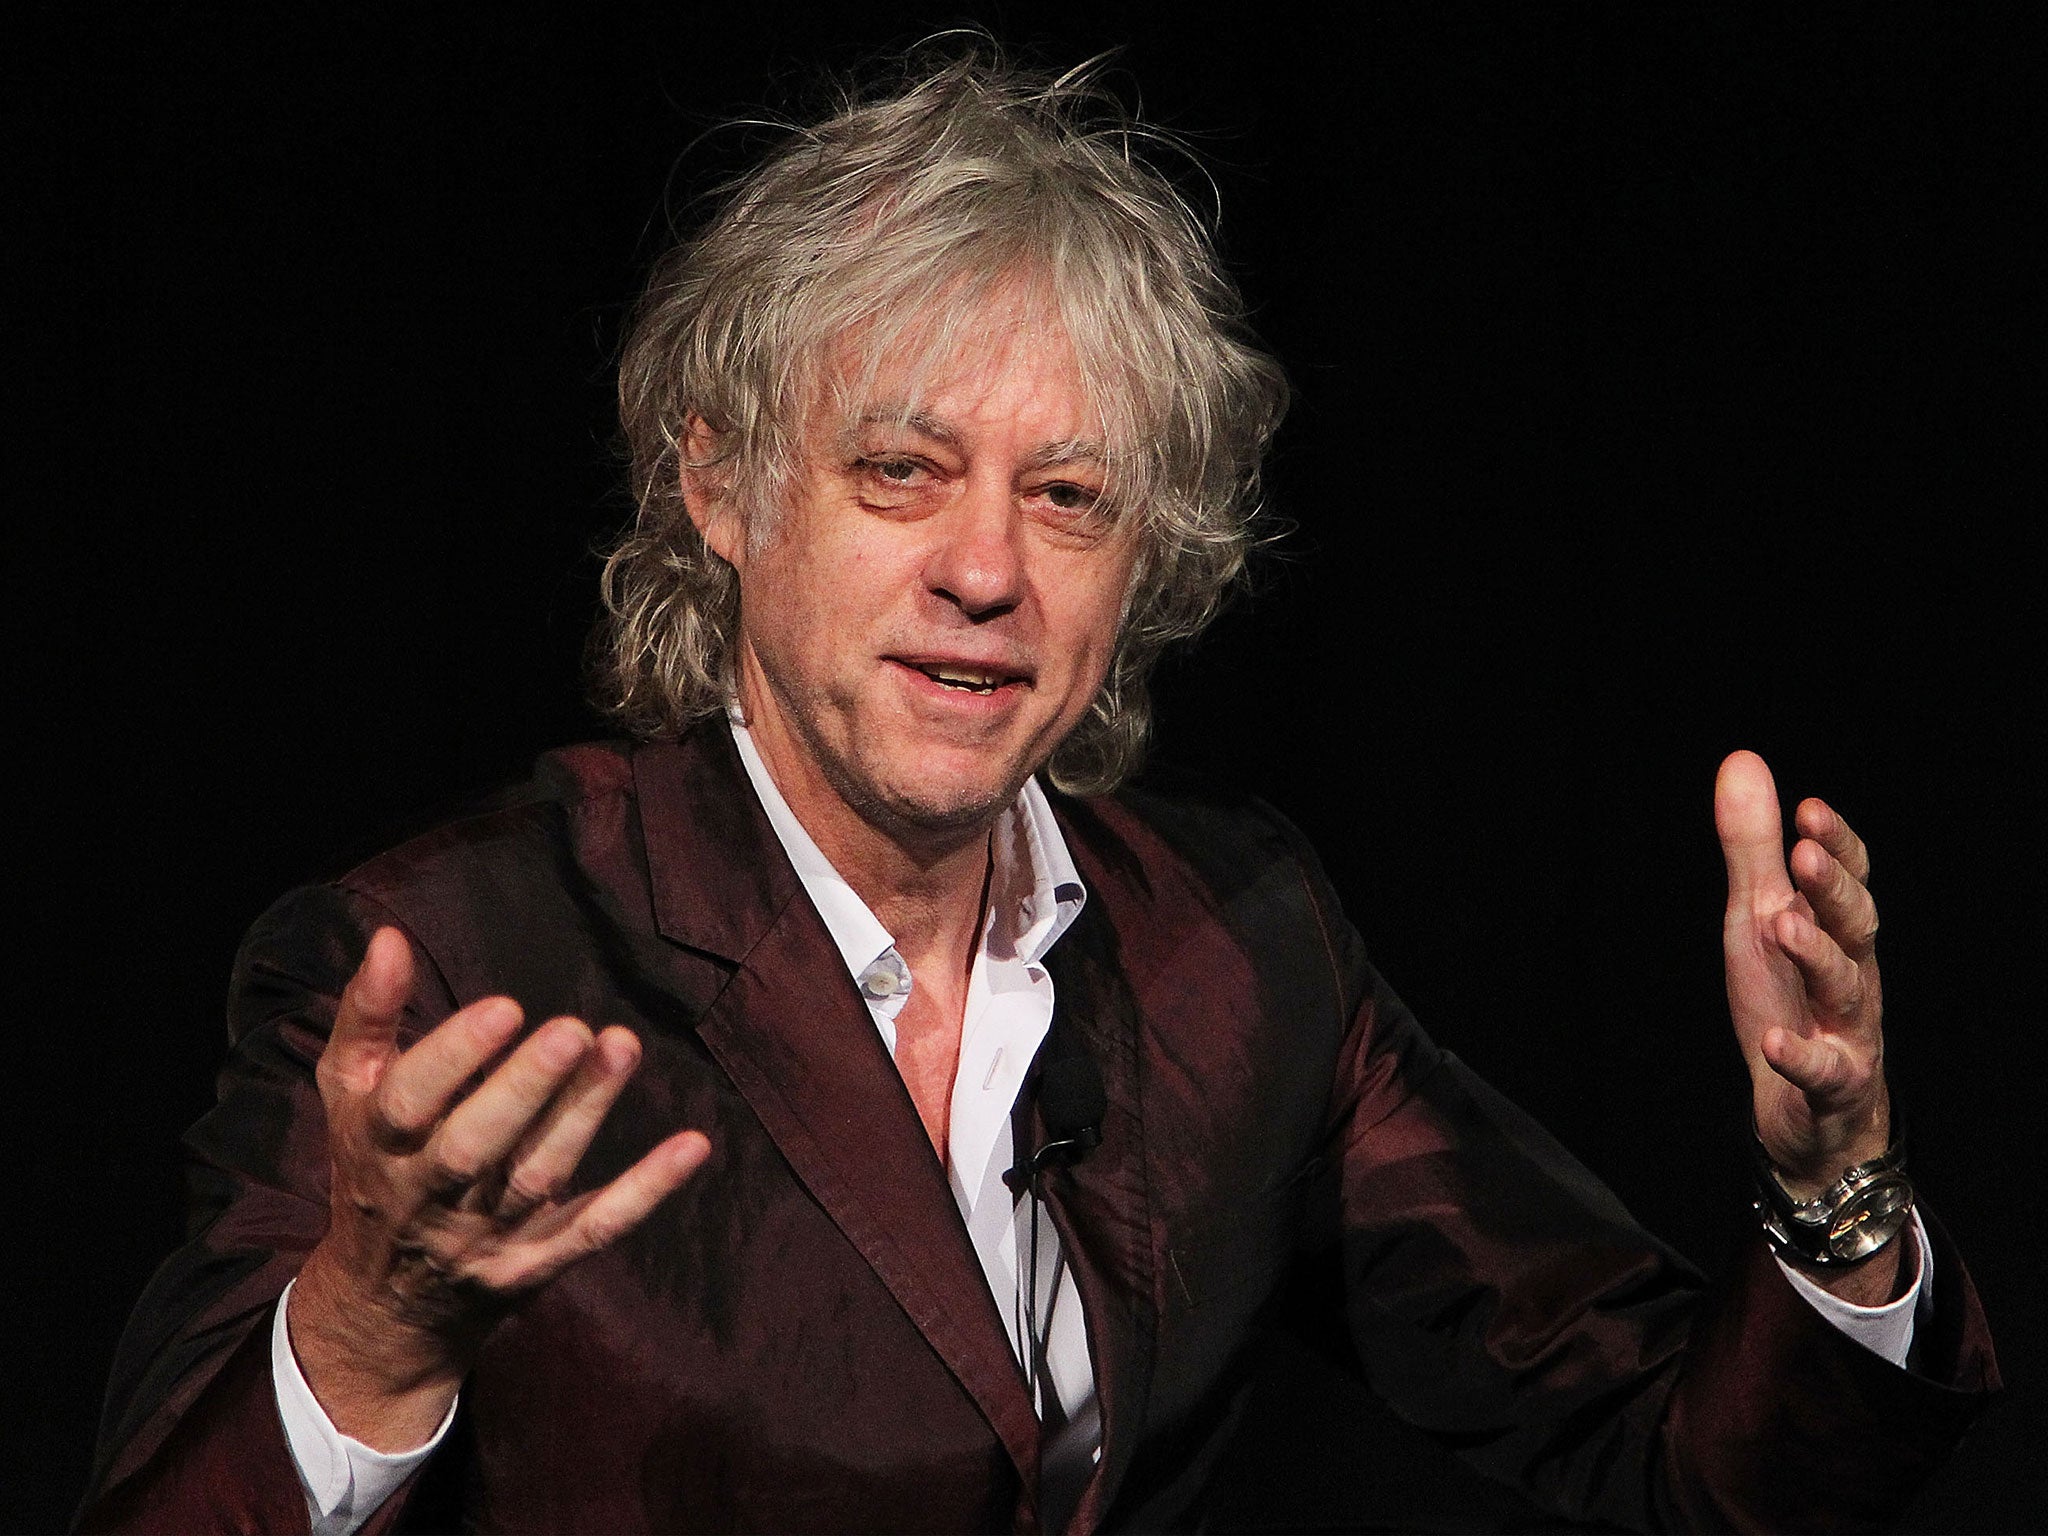 Bob Geldof is thought to be recruiting acts for a new version of his 1984 charity hit